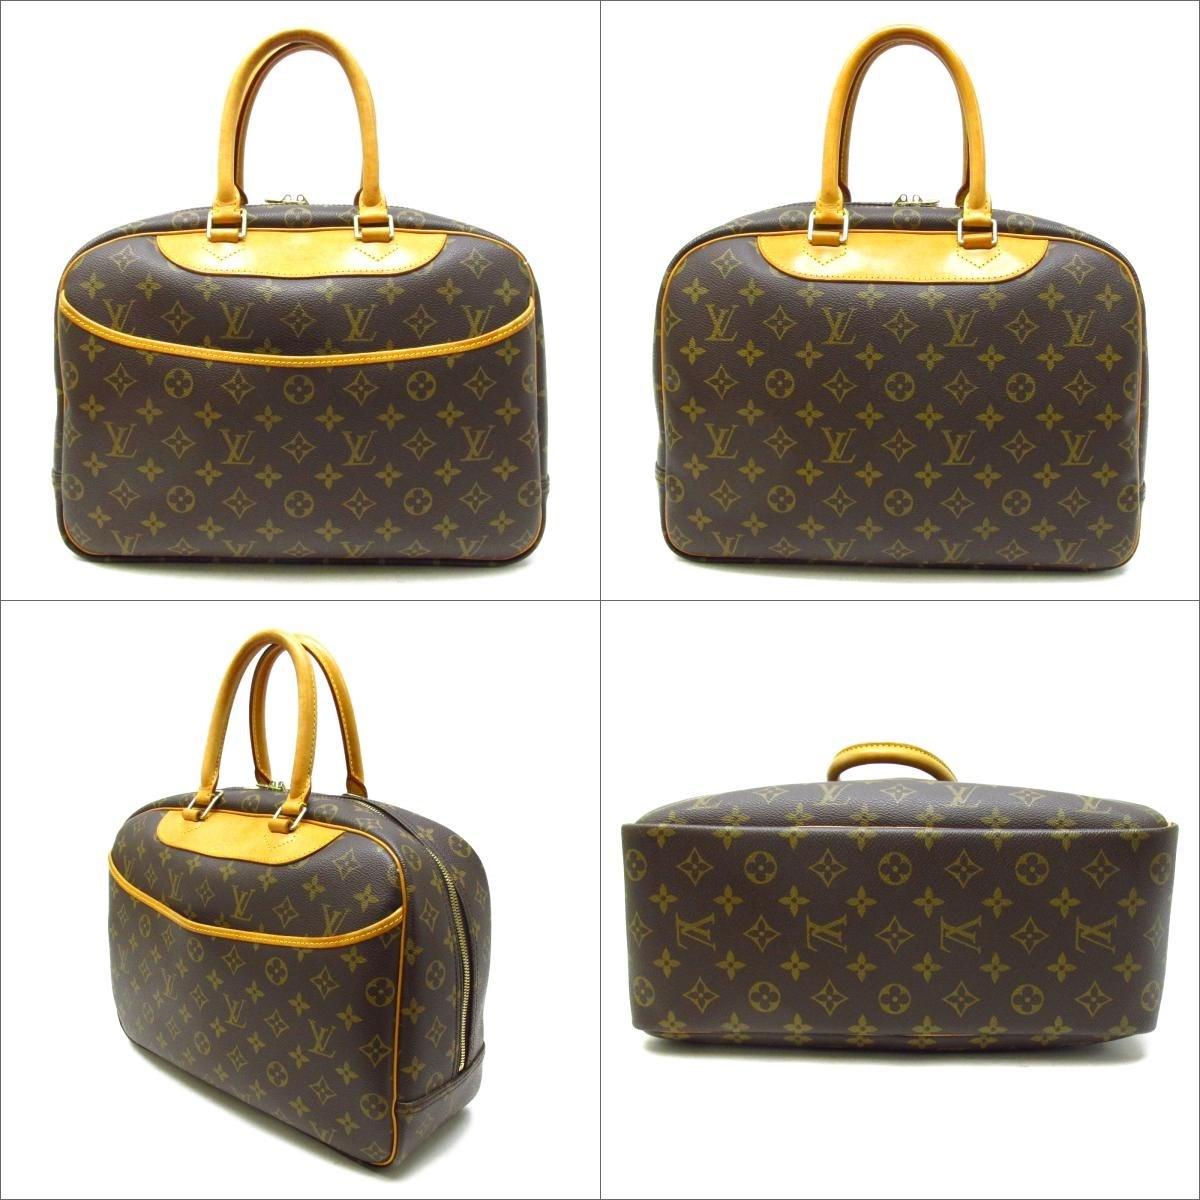 Used Louis Vuitton Toiletry Bag - 17 For Sale on 1stDibs  lv toiletry bag,  vintage louis vuitton toiletry bag, toiletry louis vuitton makeup bag